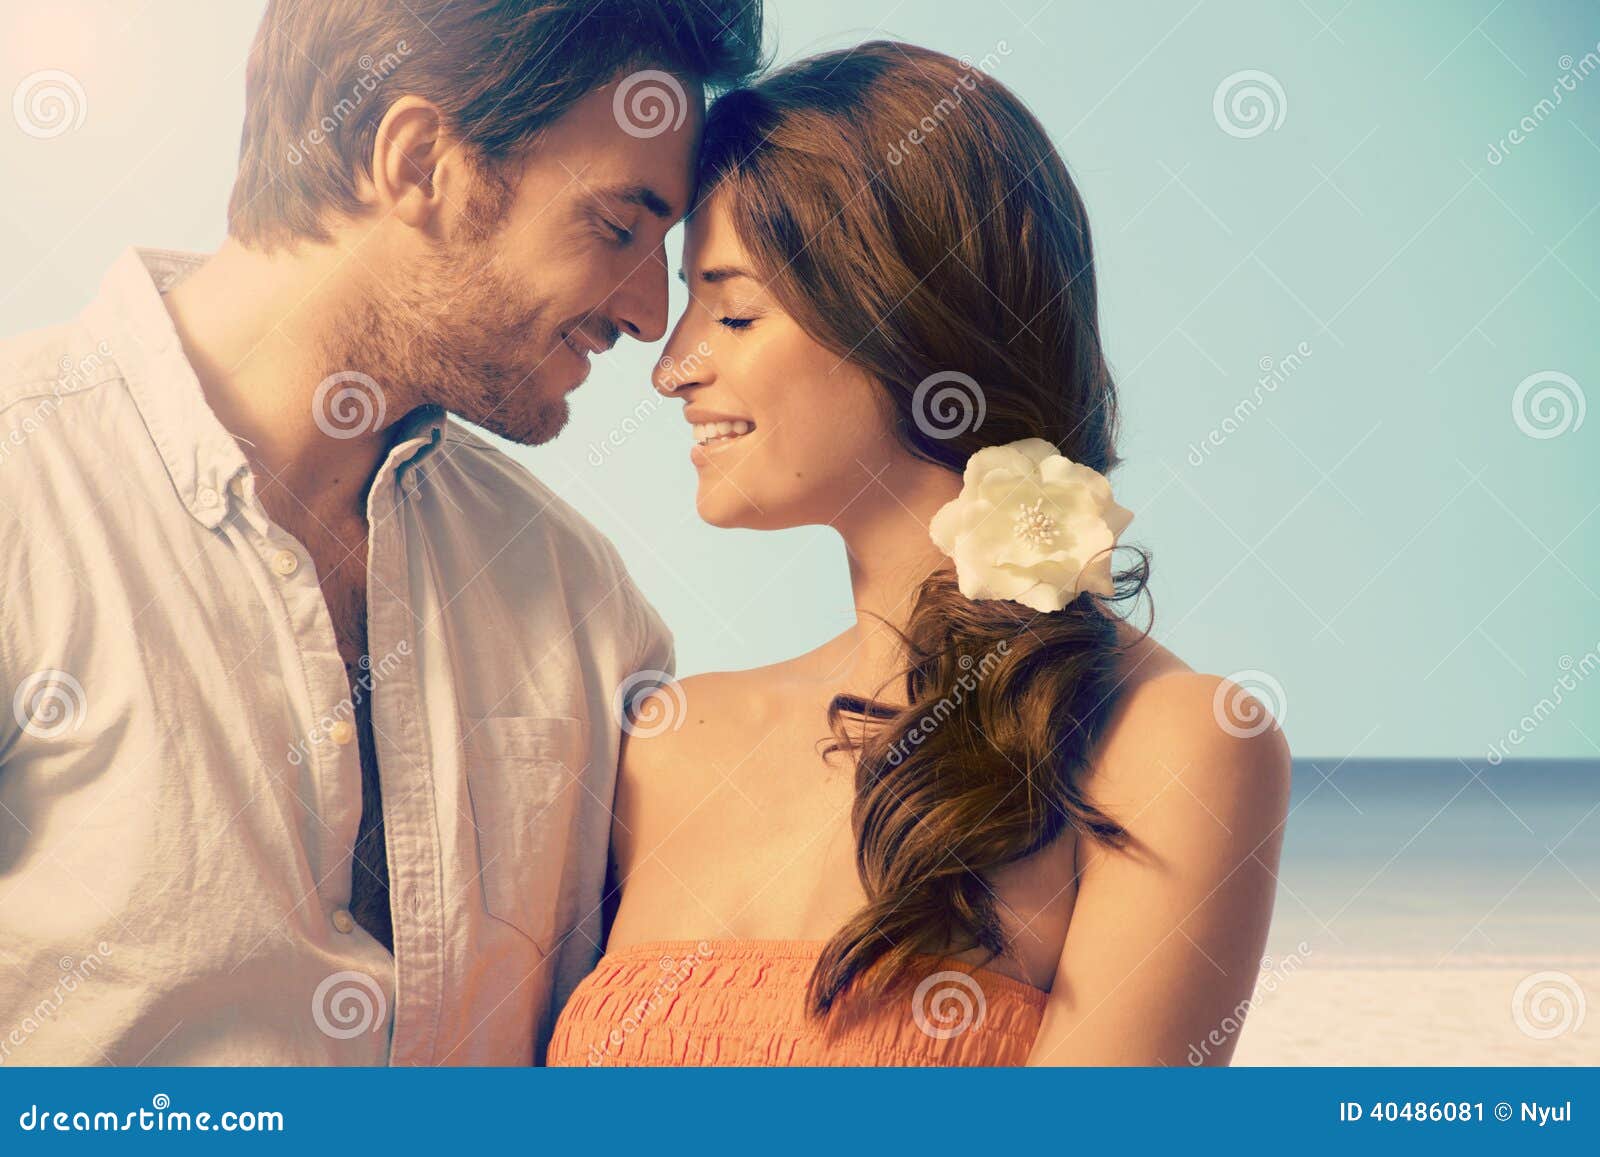 Young Married Couple Having a Romantic Moment Stock Image